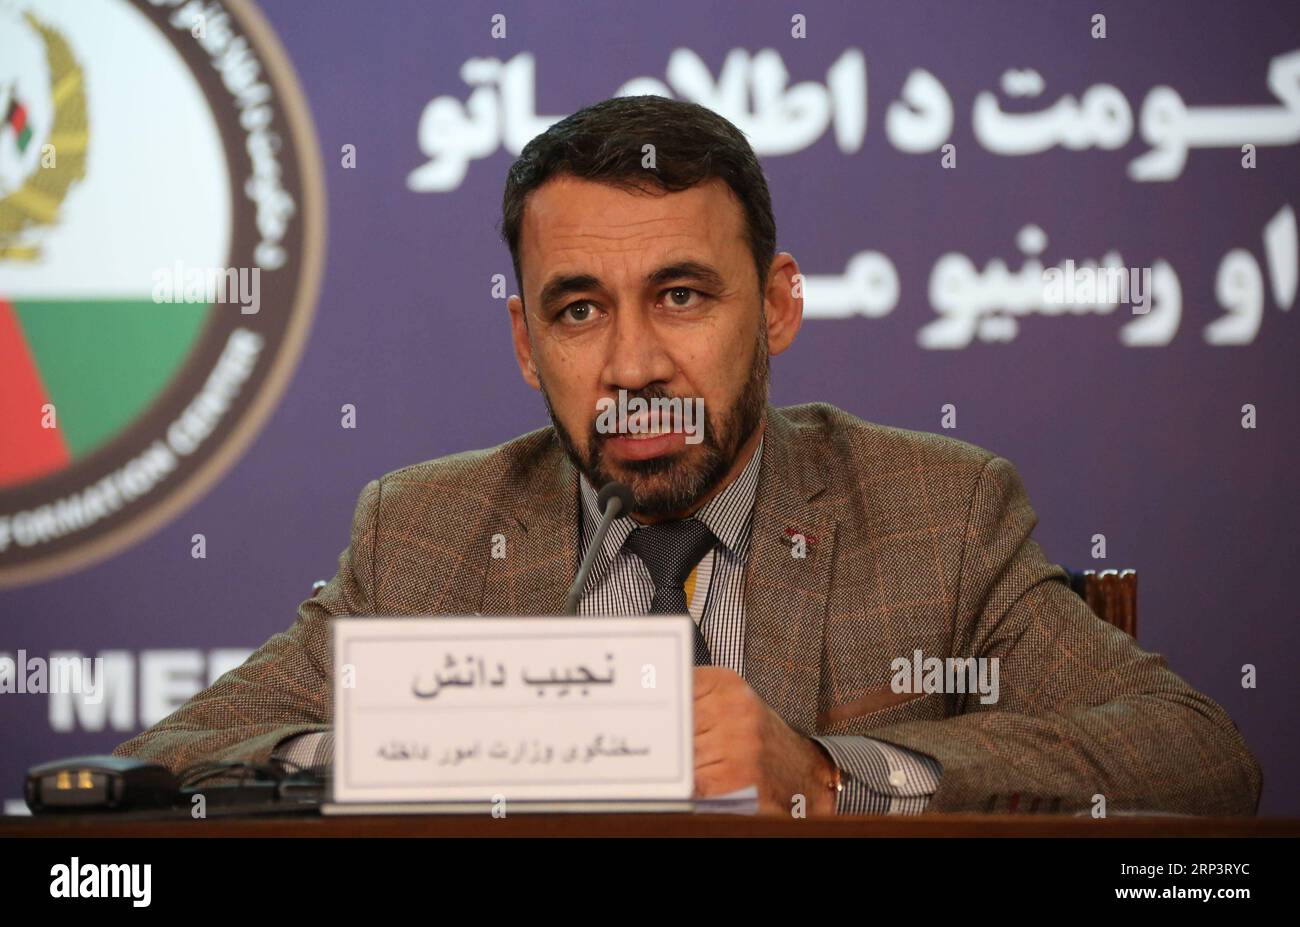 (181015) -- KABUL, Oct. 15, 2018 -- Spokesman for Afghan Interior Ministry Najib Danish speaks during a press conference in Kabul, Afghanistan, Oct. 14, 2018. As the date for the upcoming Afghan parliamentary elections is getting closer the Afghan Interior Ministry announced deployment of 50,000-strong troops to ensure security for the polling process. ) (djj) AFGHANISTAN-KABUL-PARLIAMENTARY ELECTION-SECURITY RahmatxAlizadah PUBLICATIONxNOTxINxCHN Stock Photo